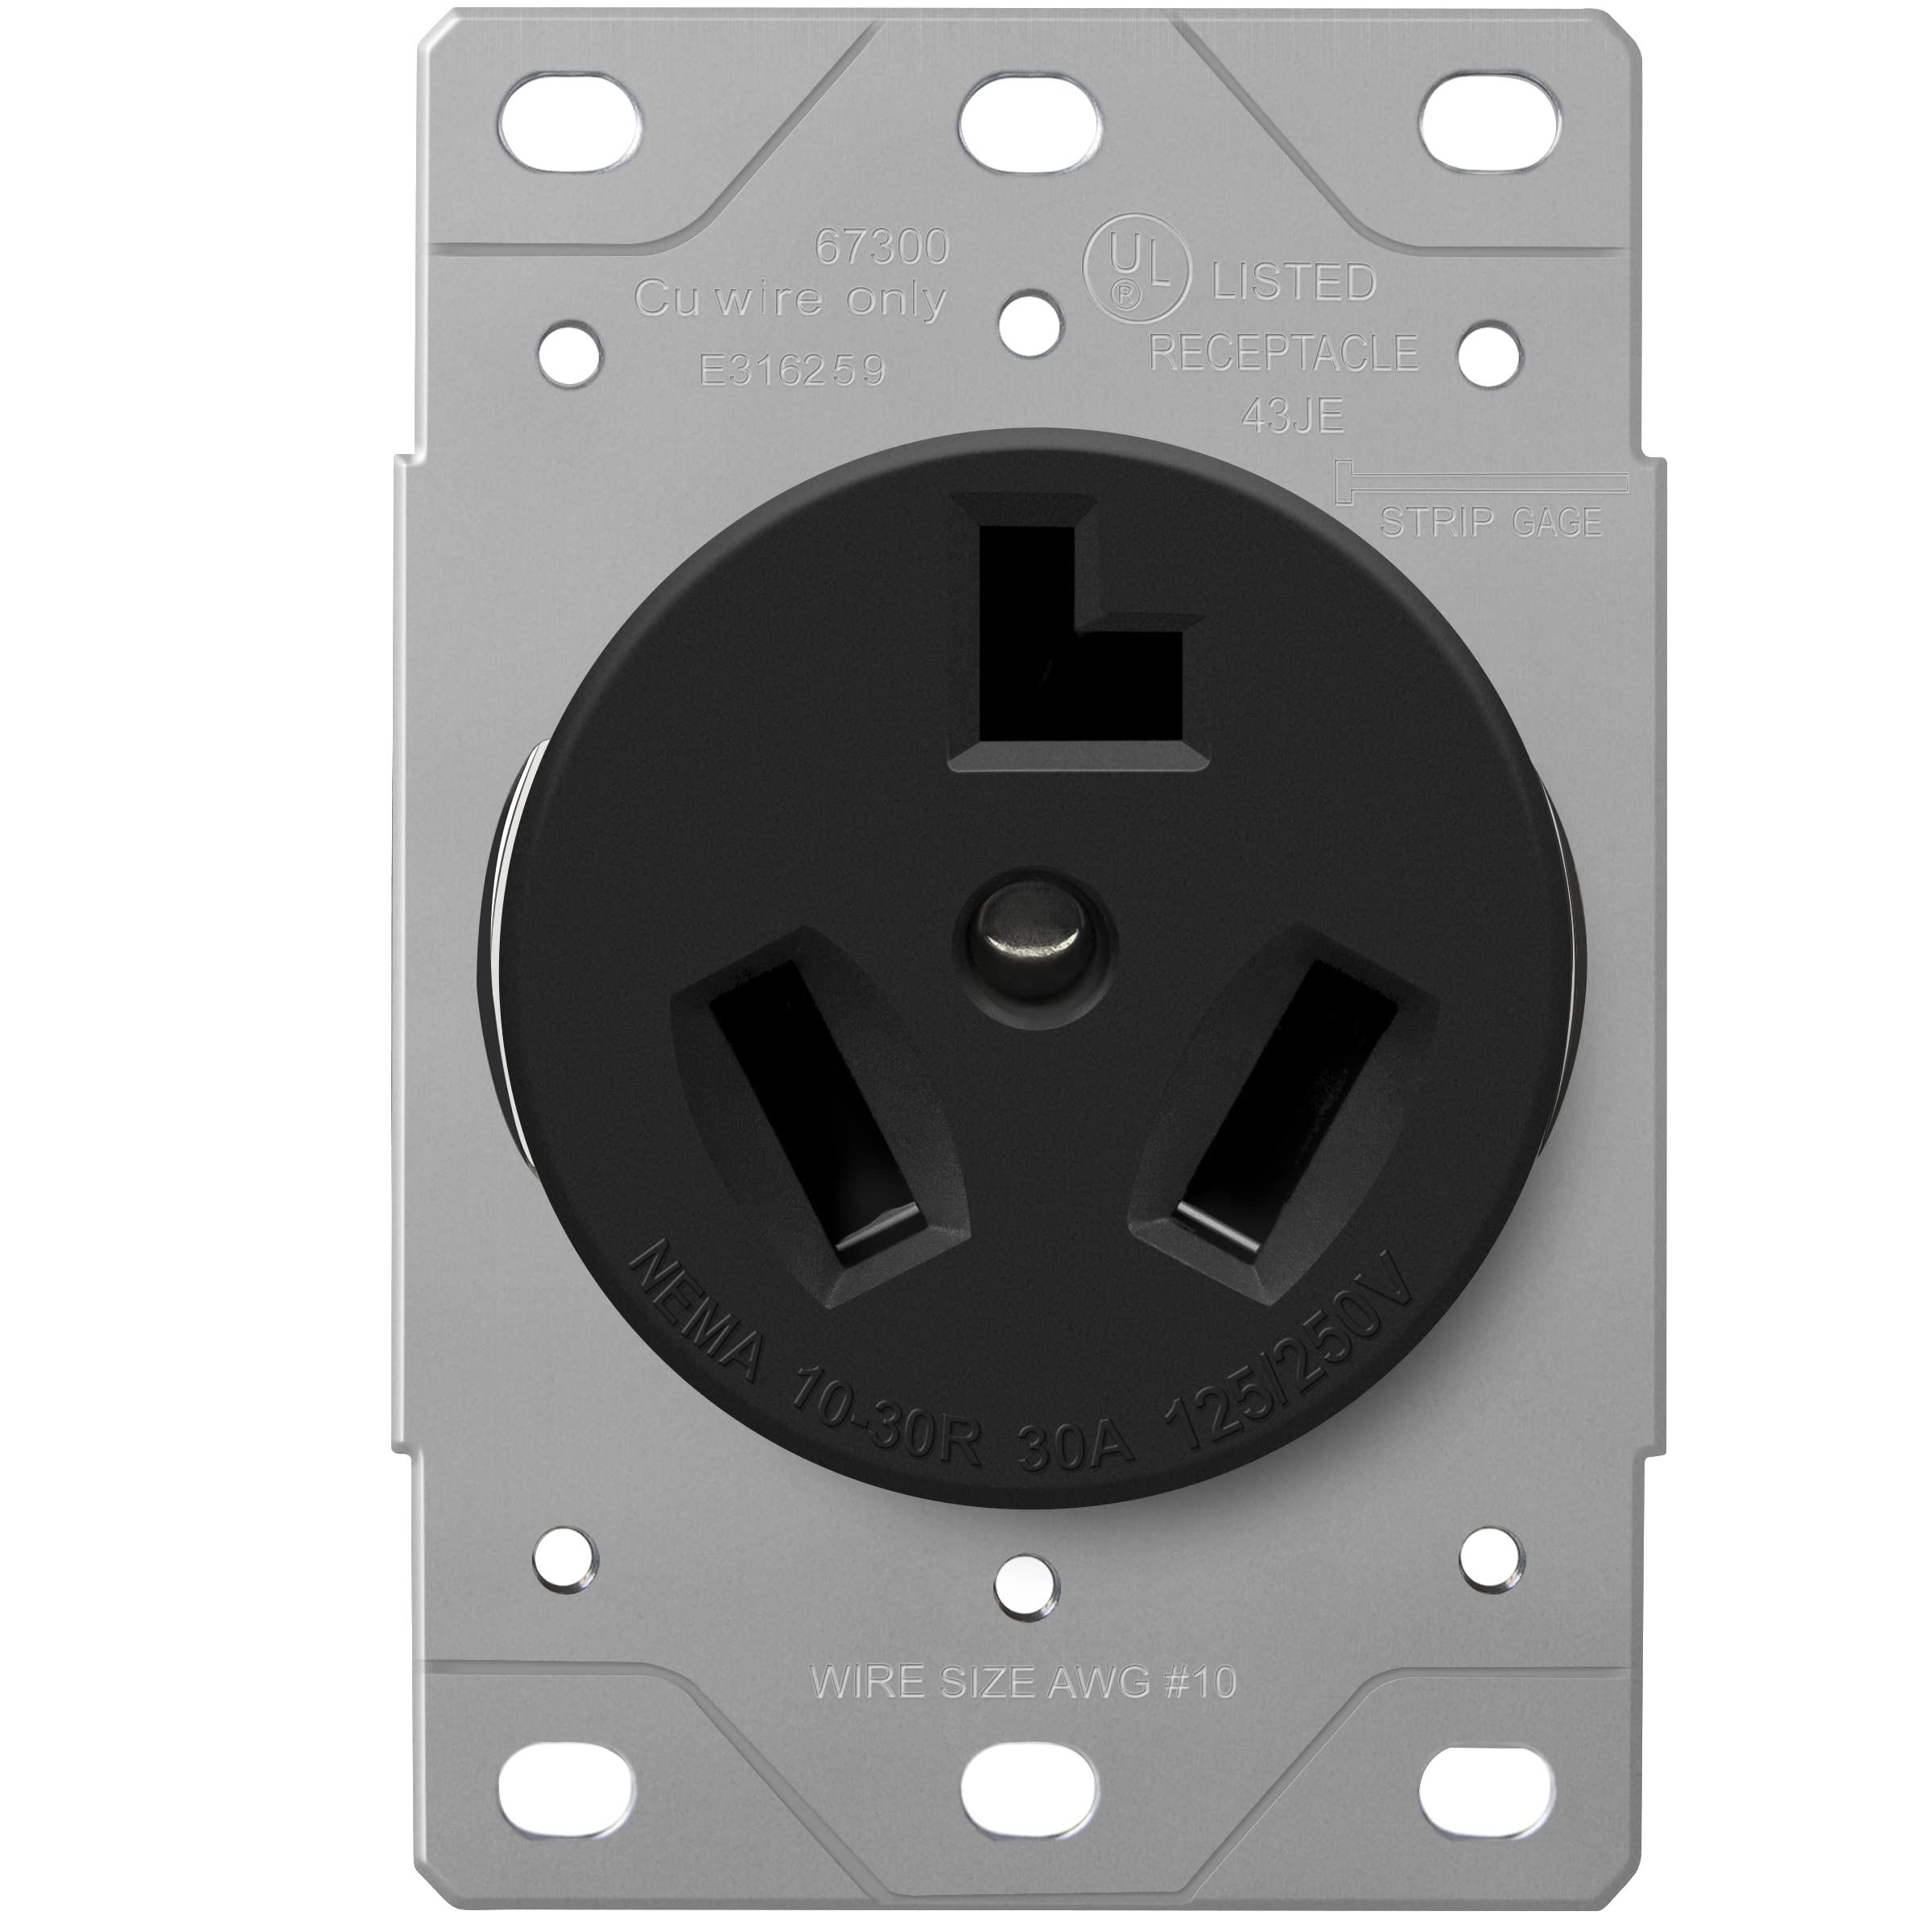 ENERLITES 30 Amp Dryer Receptacle, Outlet for Electric Dryers, NEMA 10-30R, Residential Commercial Industrial Grade, Outdoor/Indoor, 3-Pole, 3 Wire, No Ground Contact, UL Listed, 67300-BK, Black